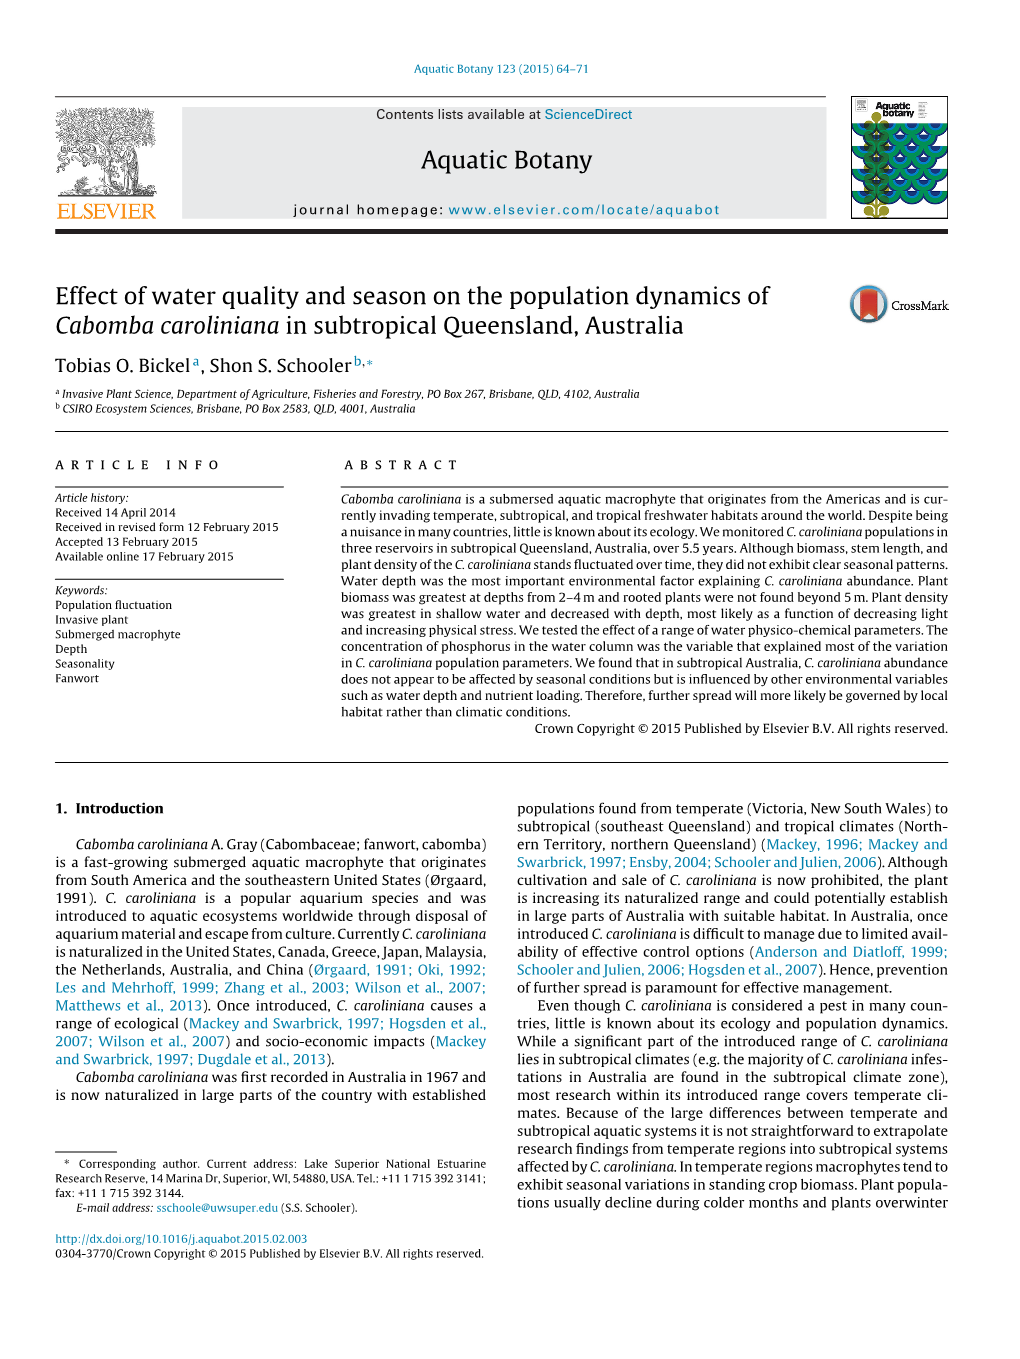 Effect of Water Quality and Season on the Population Dynamics of Cabomba Caroliniana in Subtropical Queensland, Australia